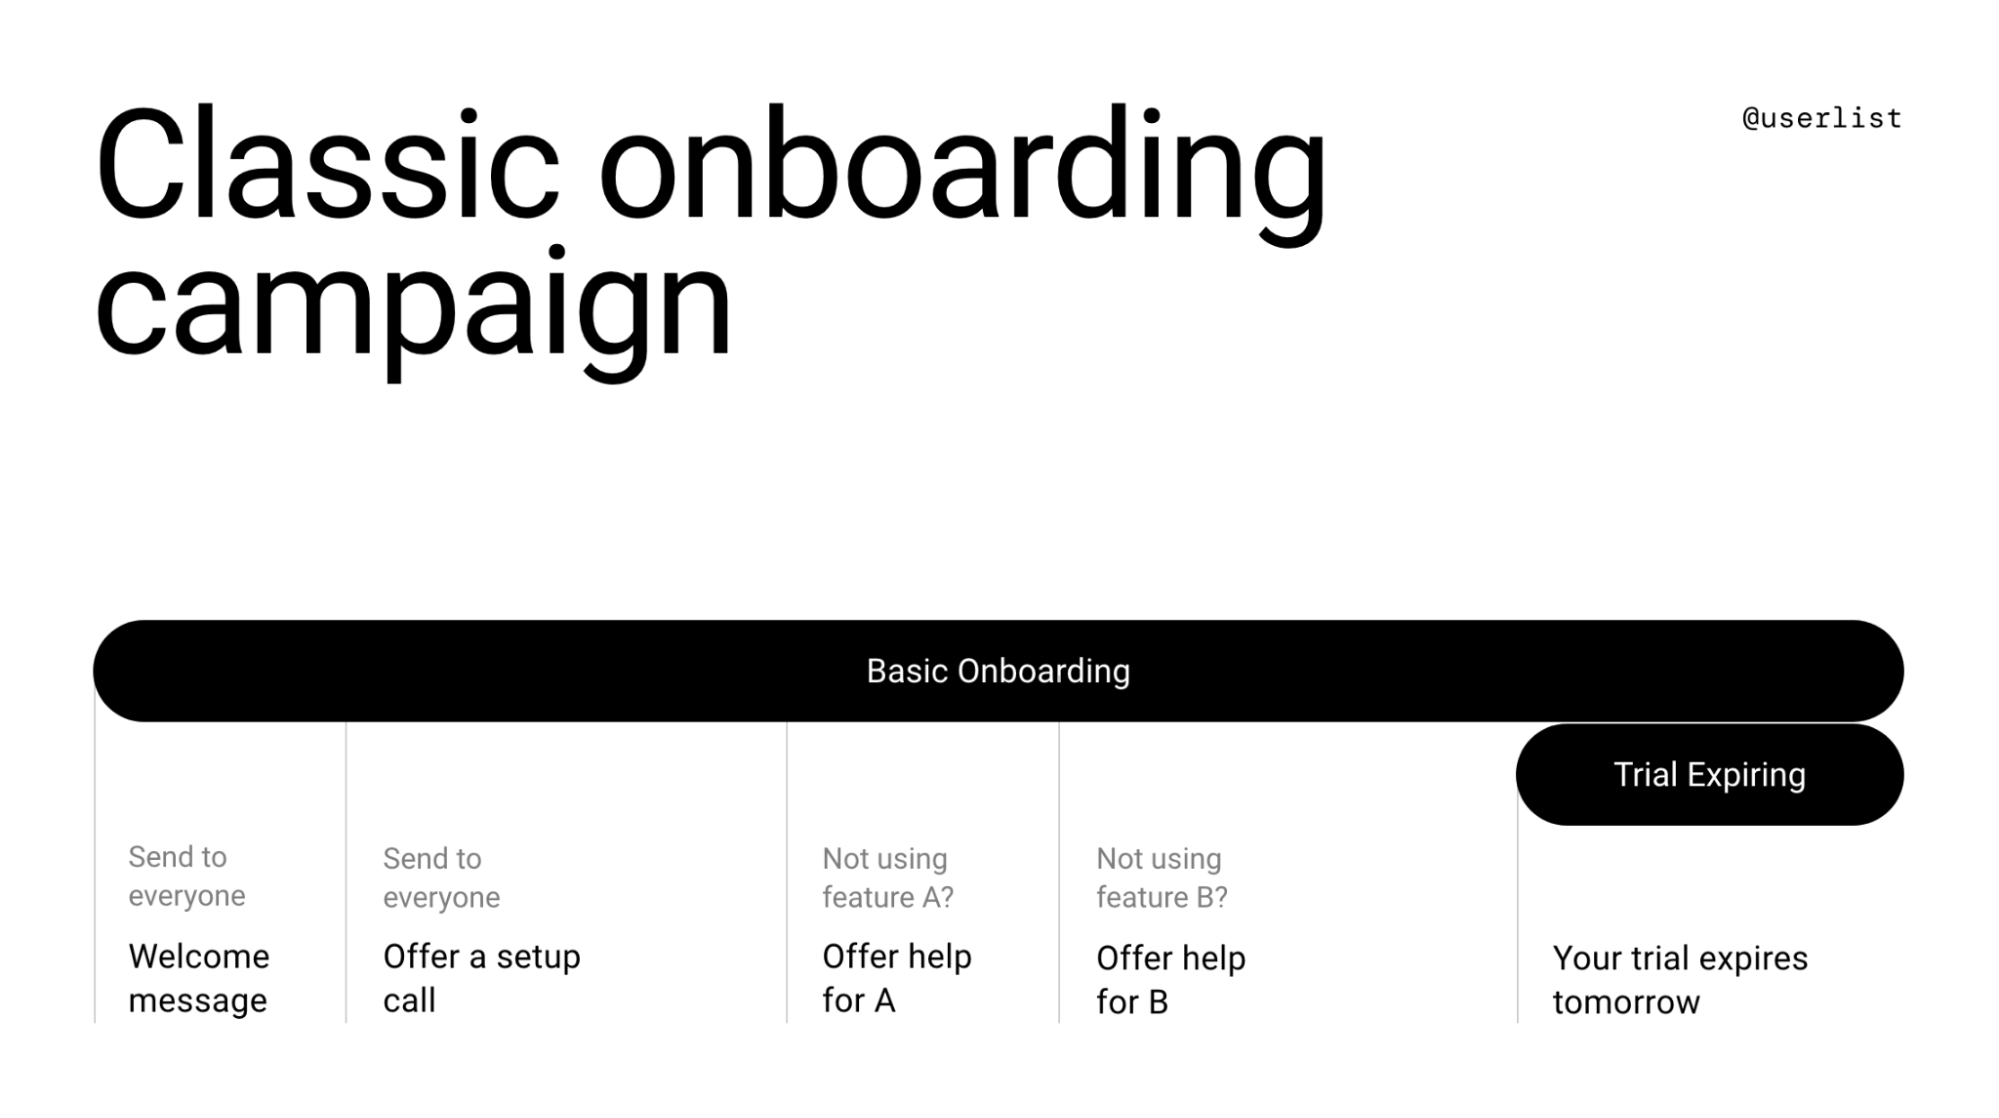 SaaS Email Marketing Strategies: A map of the classic onboarding campaign